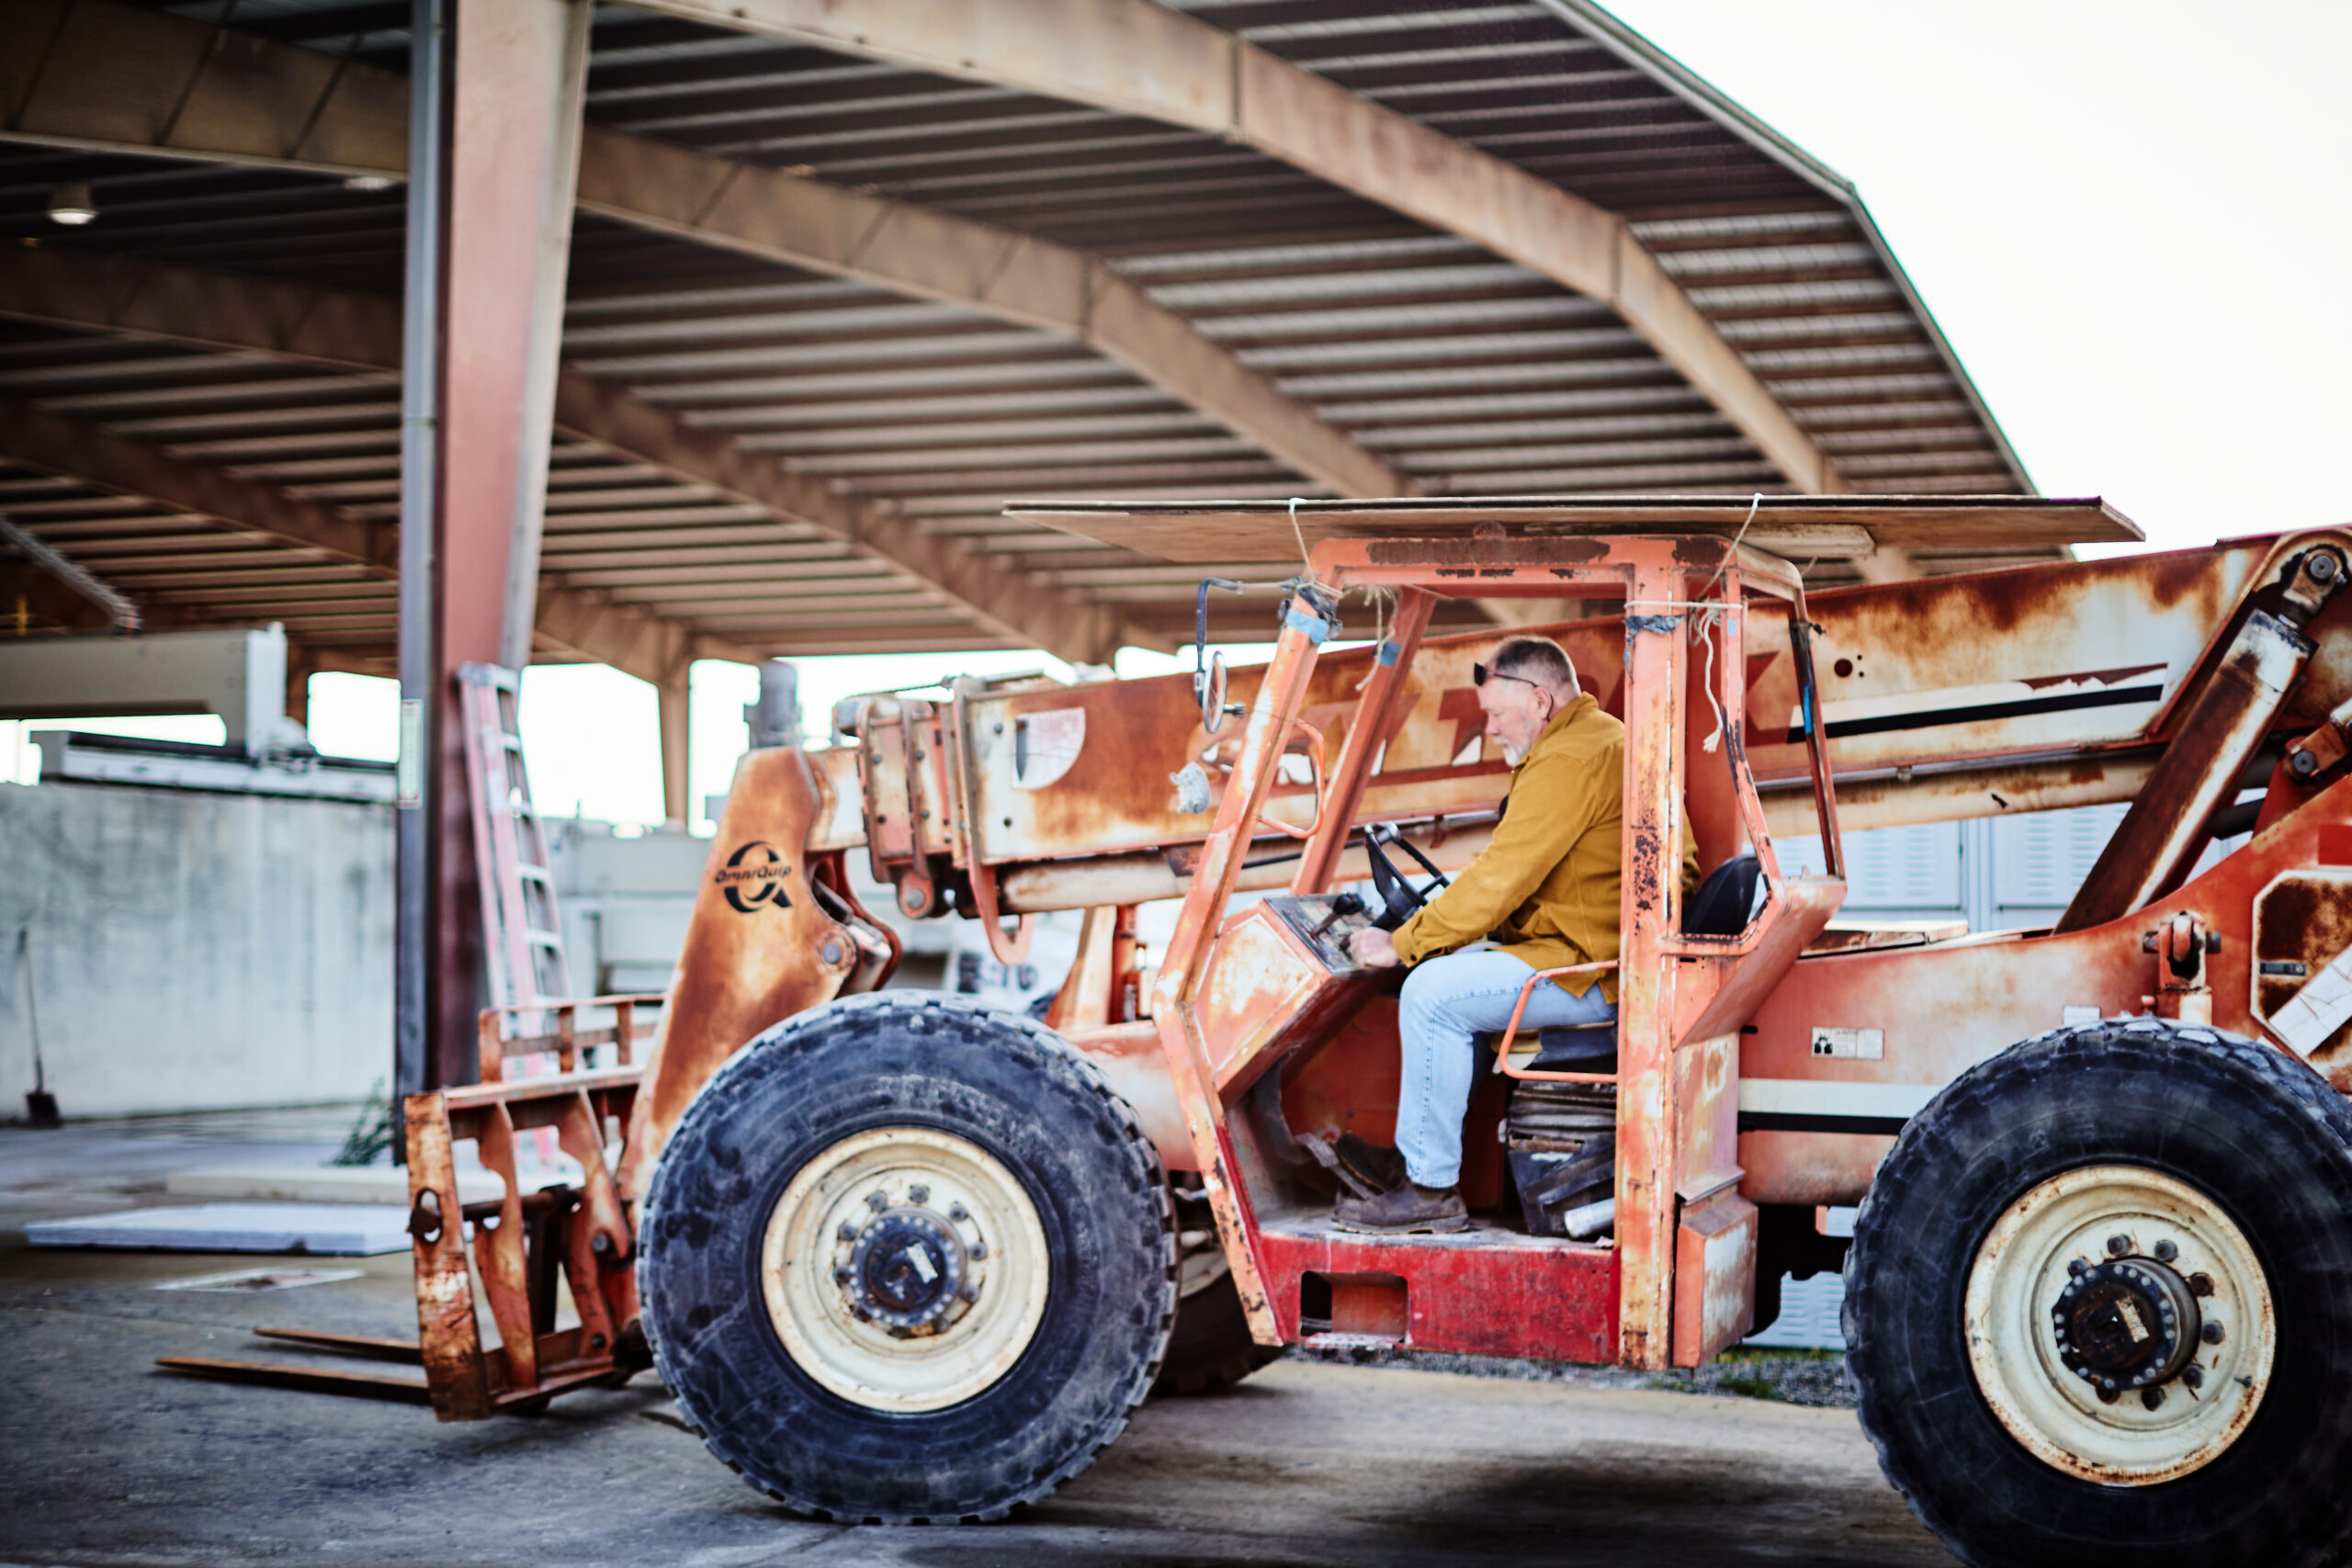 Hamilton’s workspace at a commercial stoneyard offers access to diamond saws, cranes, and other heavy equipment. (Kim Carroll/For Sonoma Magazine) 